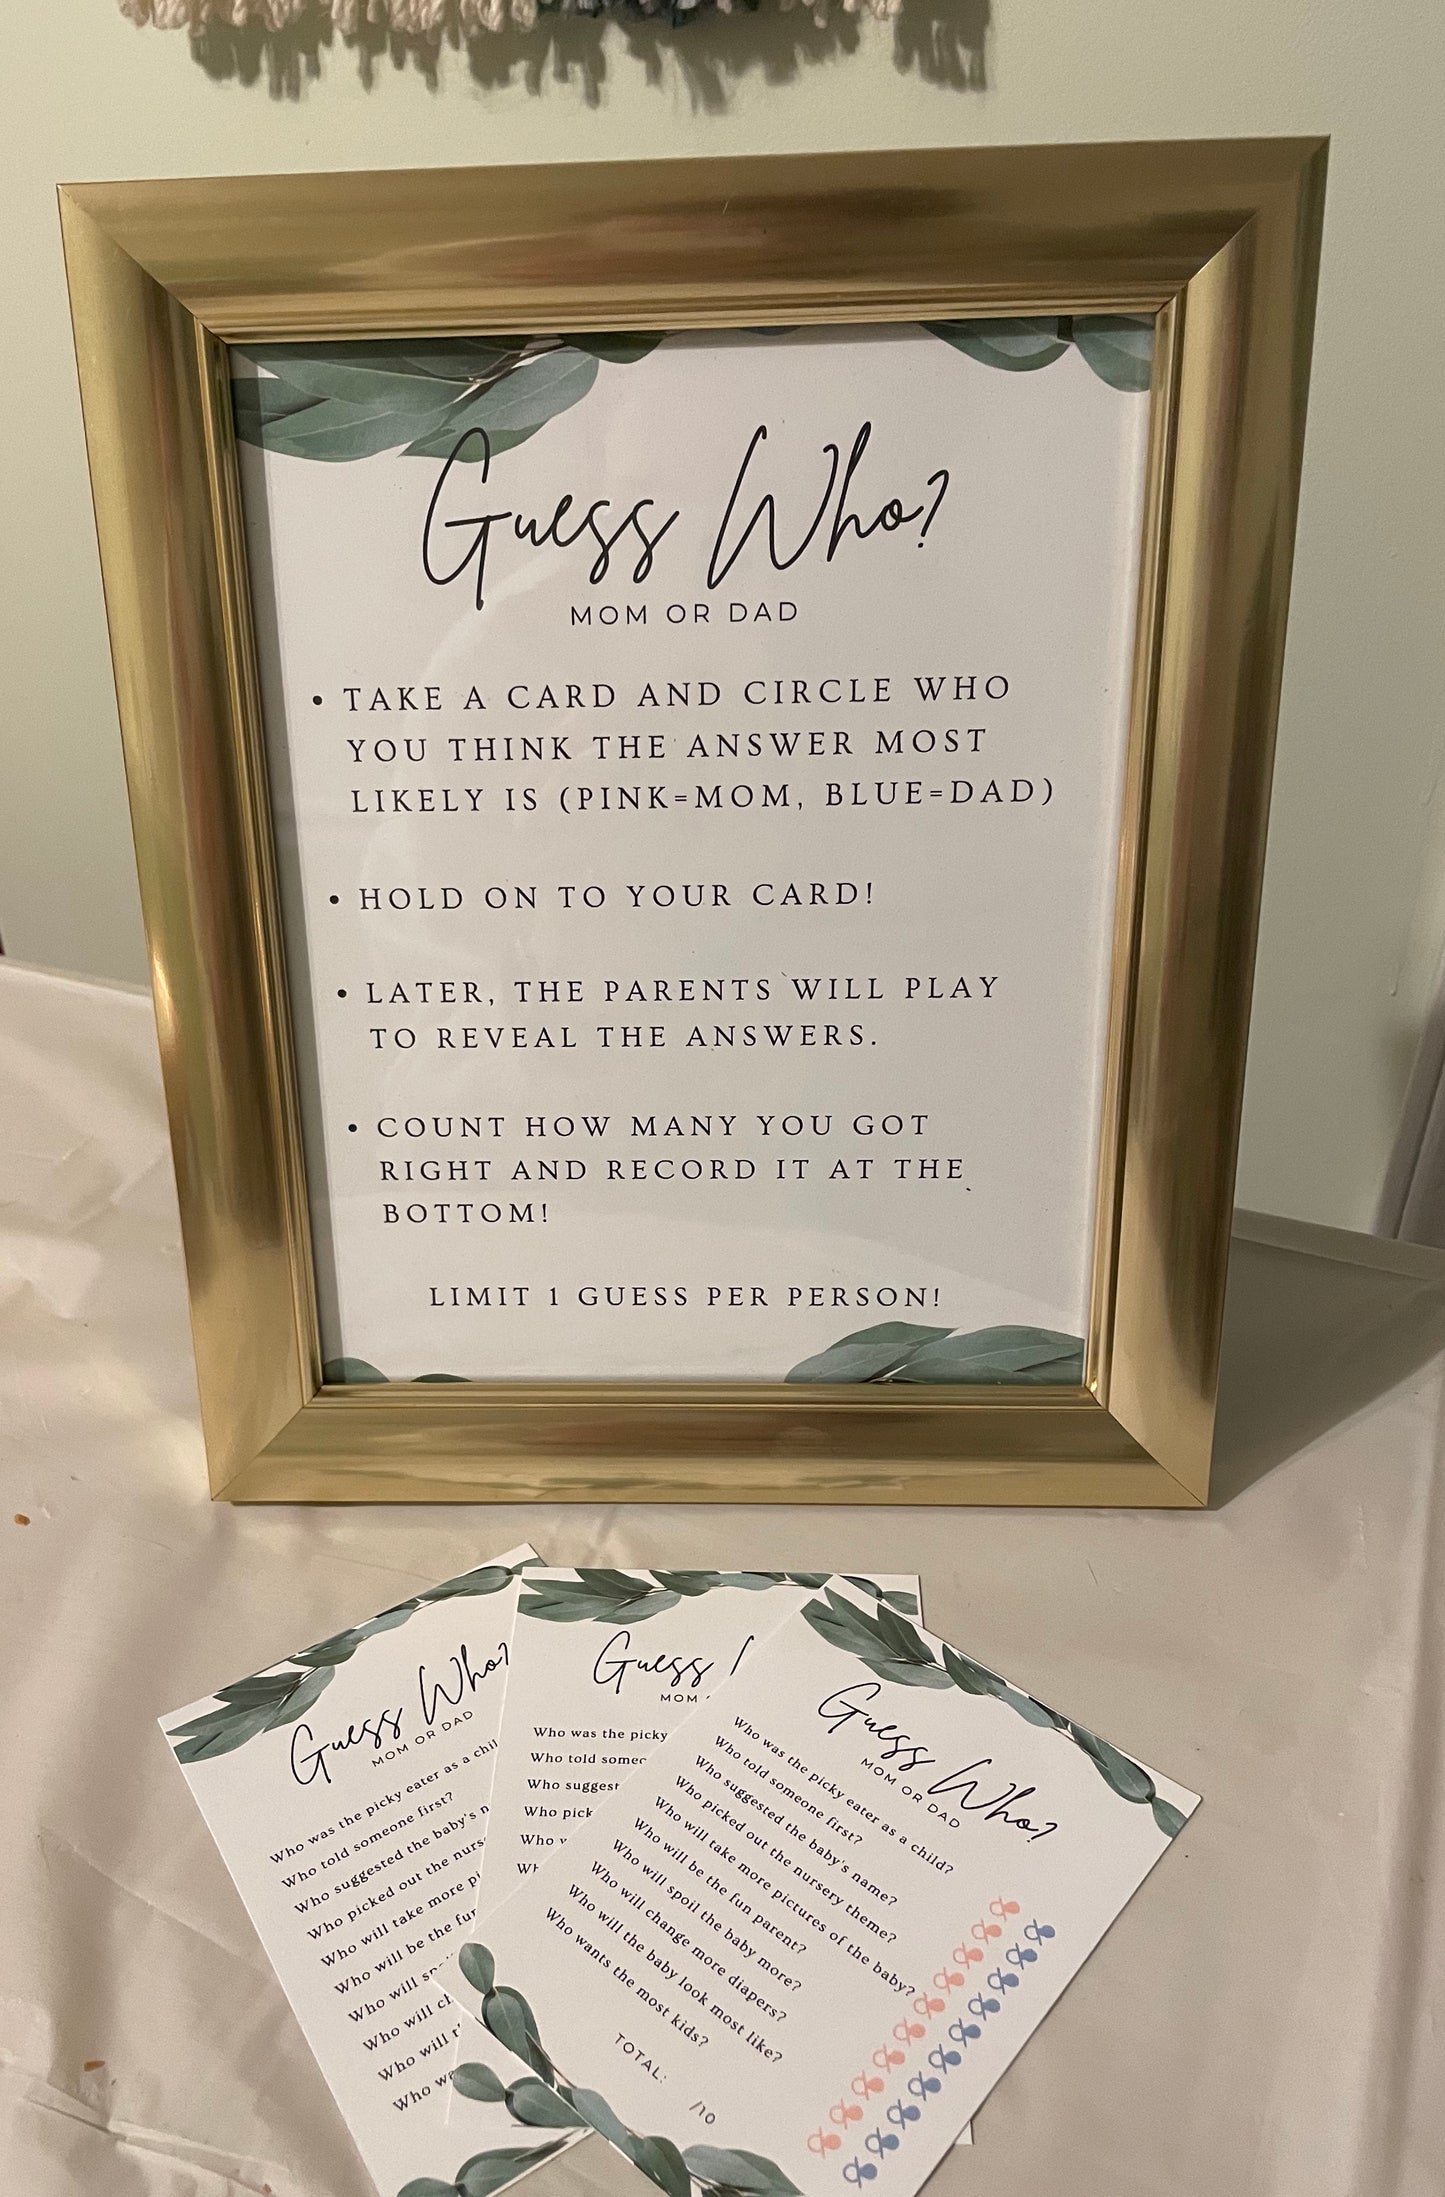 Baby Shower Guest Activity - Guess Who Mom vs Dad - Simplistic with Greenery - DOWNLOADABLE (pdf) PRINTABLE